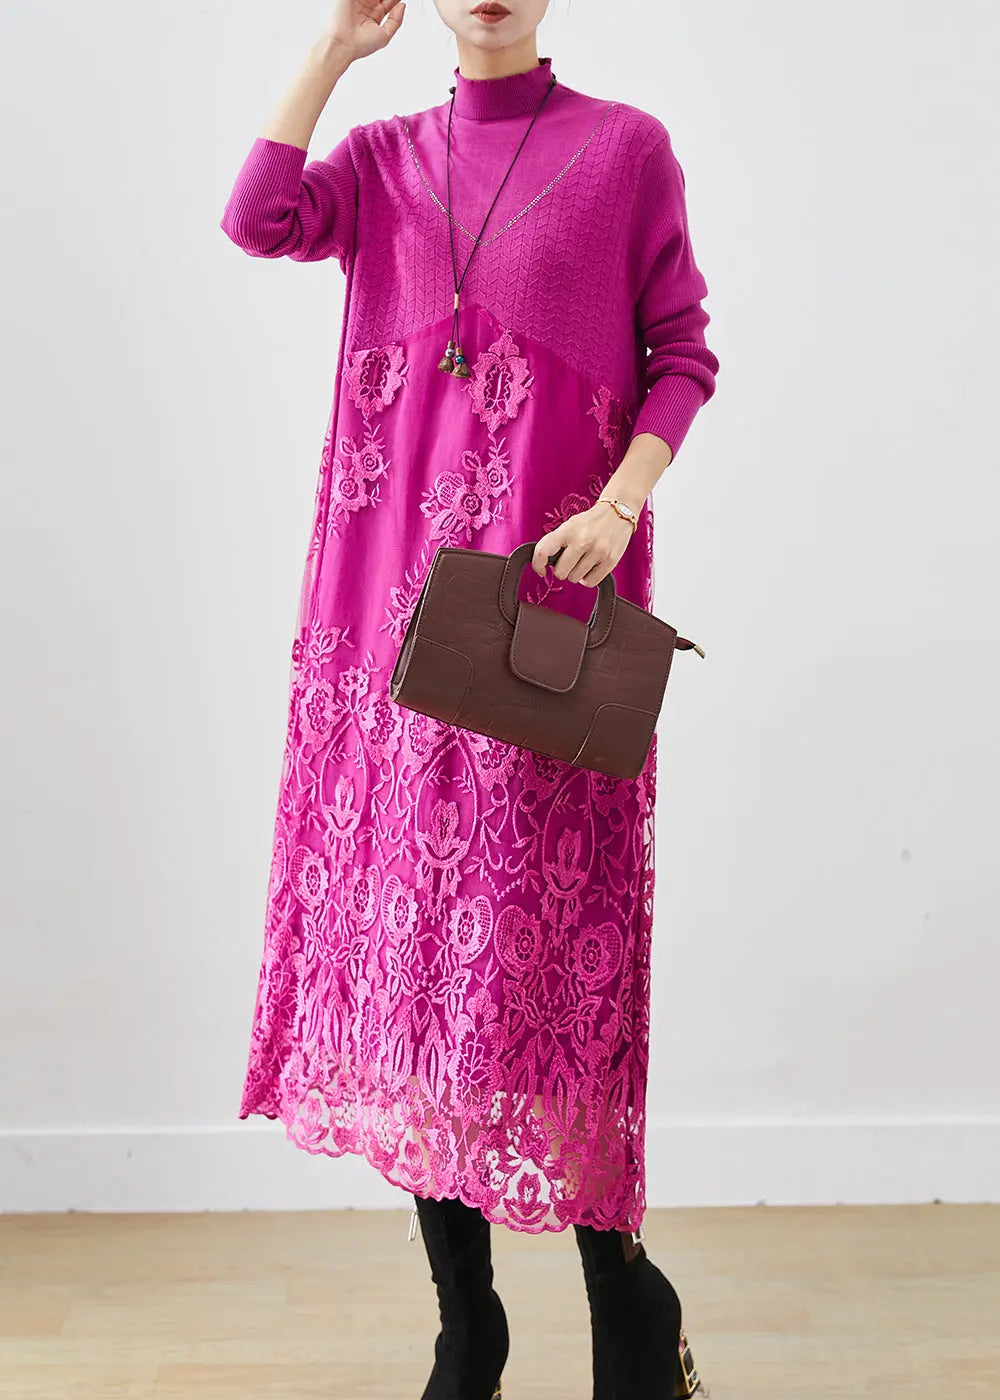 Rose Patchwork Knit Robe Dresses Embroideried Fall Ada Fashion